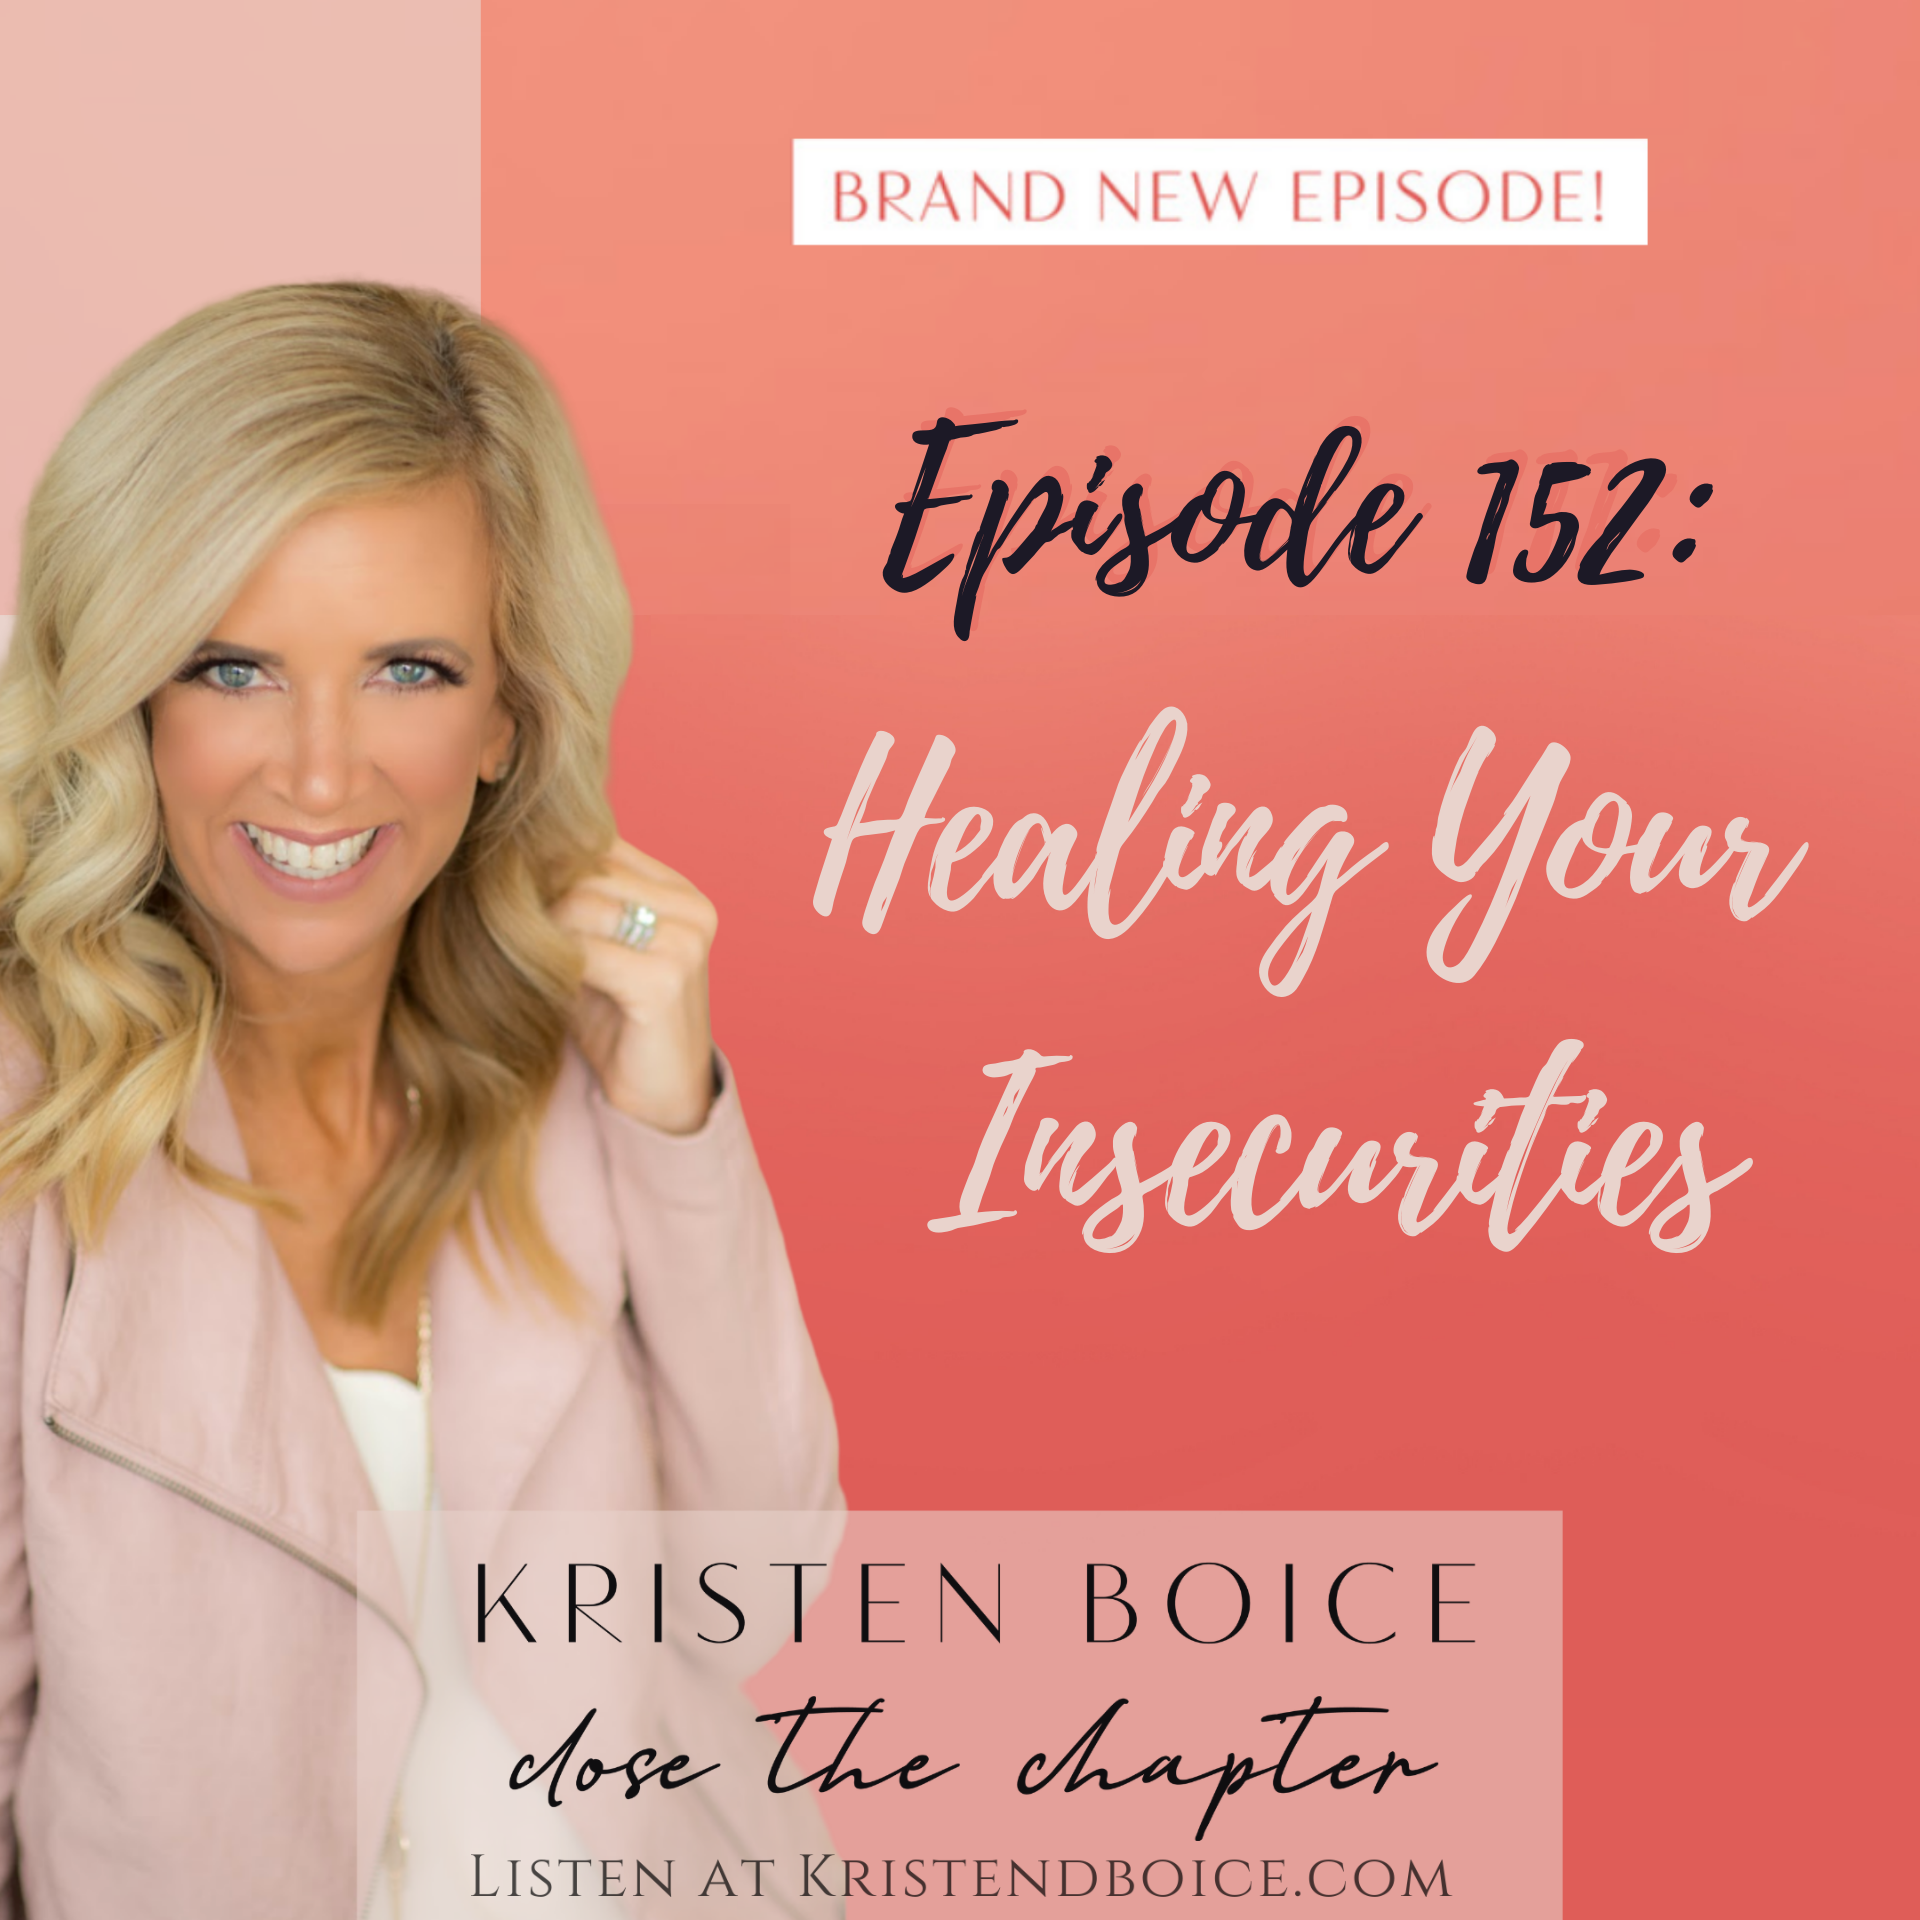 Episode 152 Healing Your Insecurites